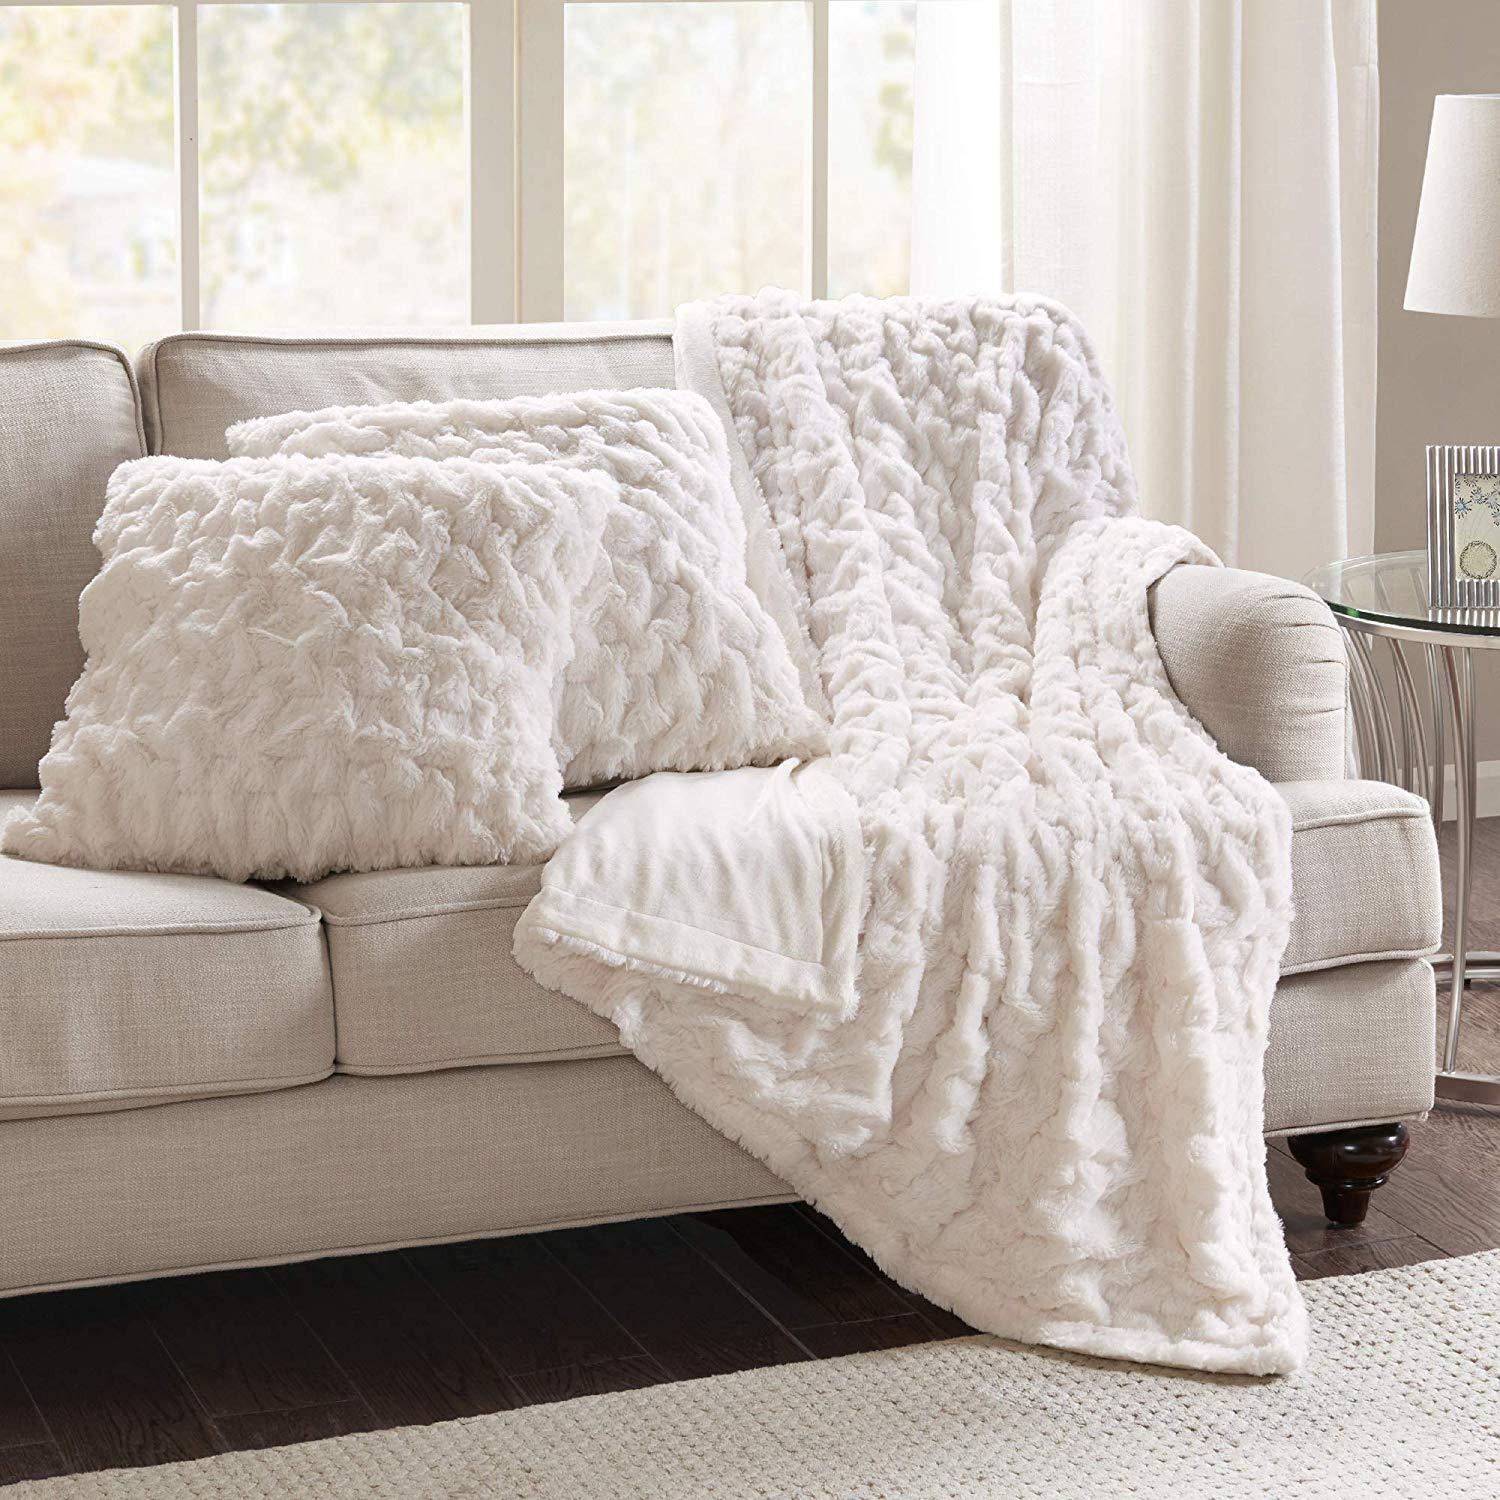 Comfort Spaces Faux Fur Throw Blanket Set – Fluffy Plush Blankets for